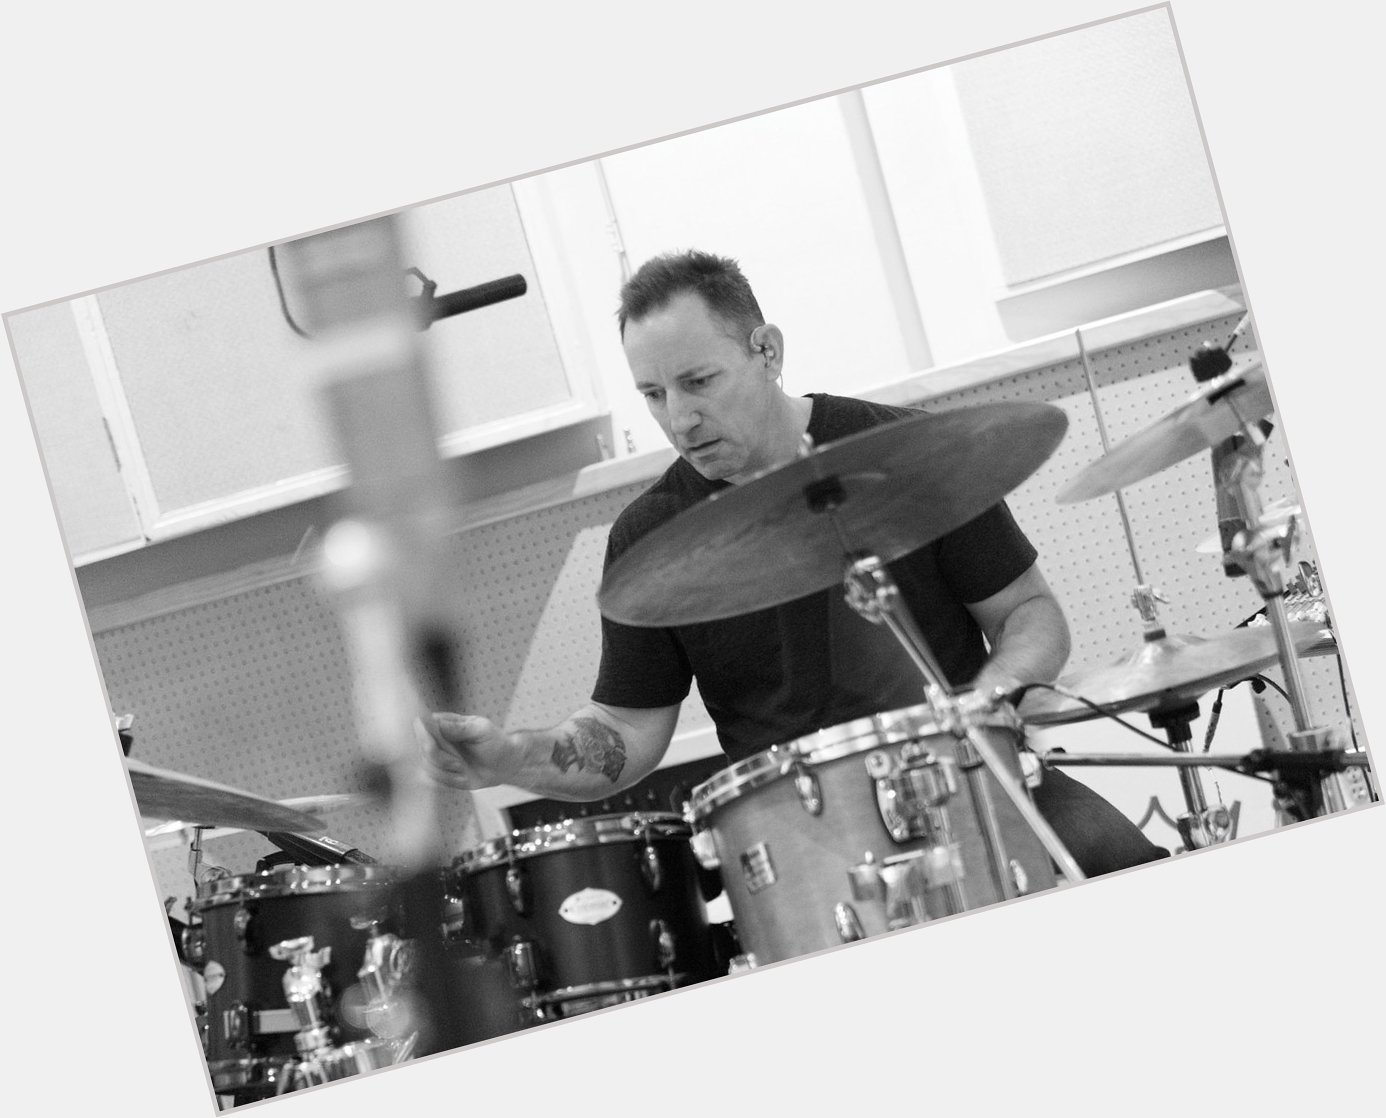 A drum god was born today; happy birthday to Jimmy Chamberlin of Smashing Pumpkins! 